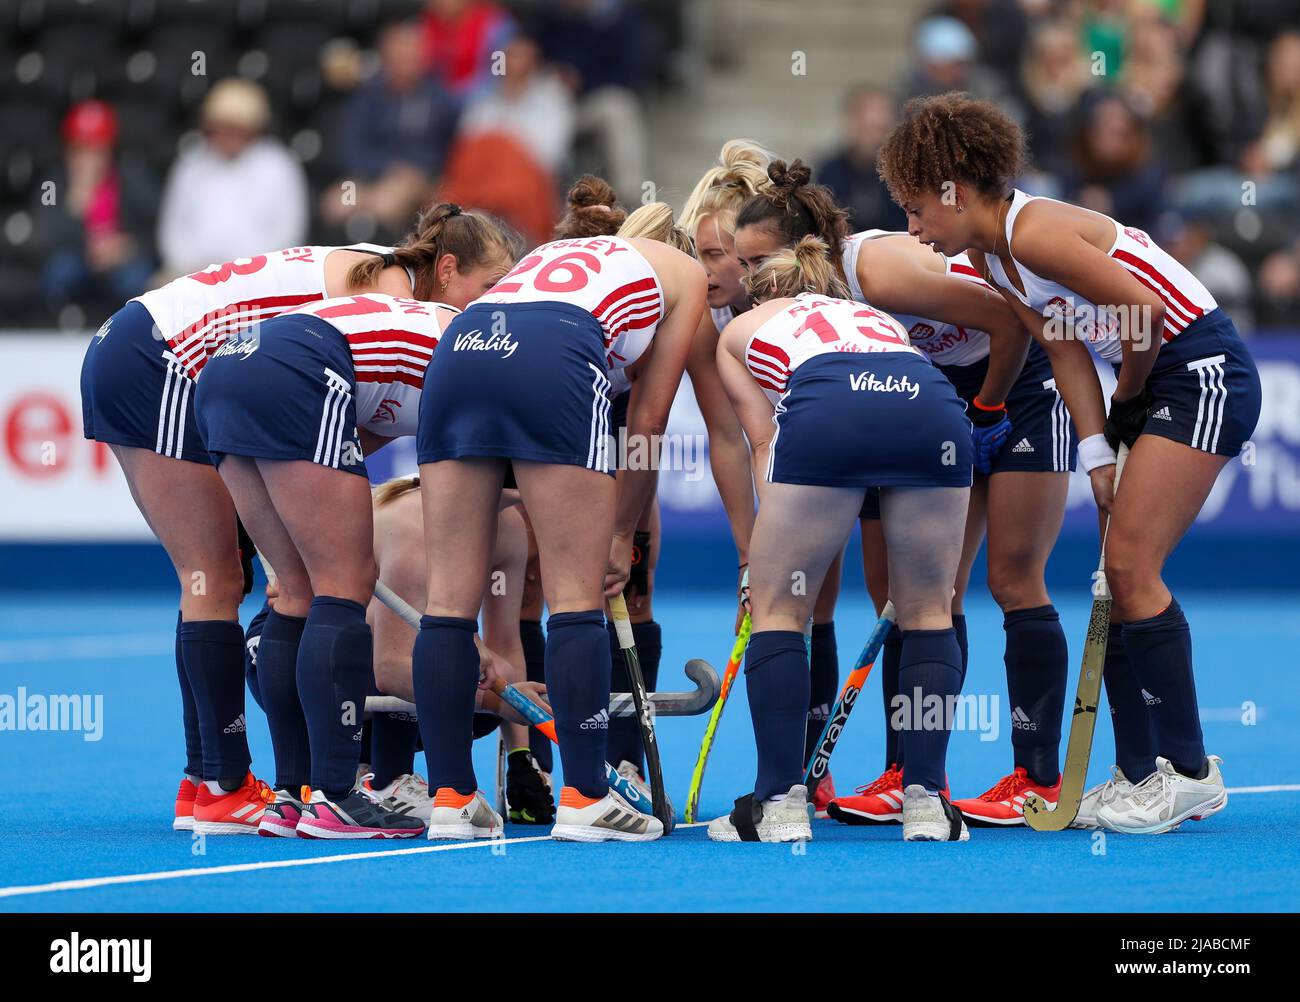 England players huddle during the FIH Hockey Pro League match at Lee Valley, London. Picture date: Sunday May 29, 2022. See PA story HOCKEY England Women. Photo credit should read: Bradley Collyer/PA Wire. RESTRICTIONS: Use subject to restrictions. Editorial use only, no commercial use without prior consent from rights holder. Stock Photo